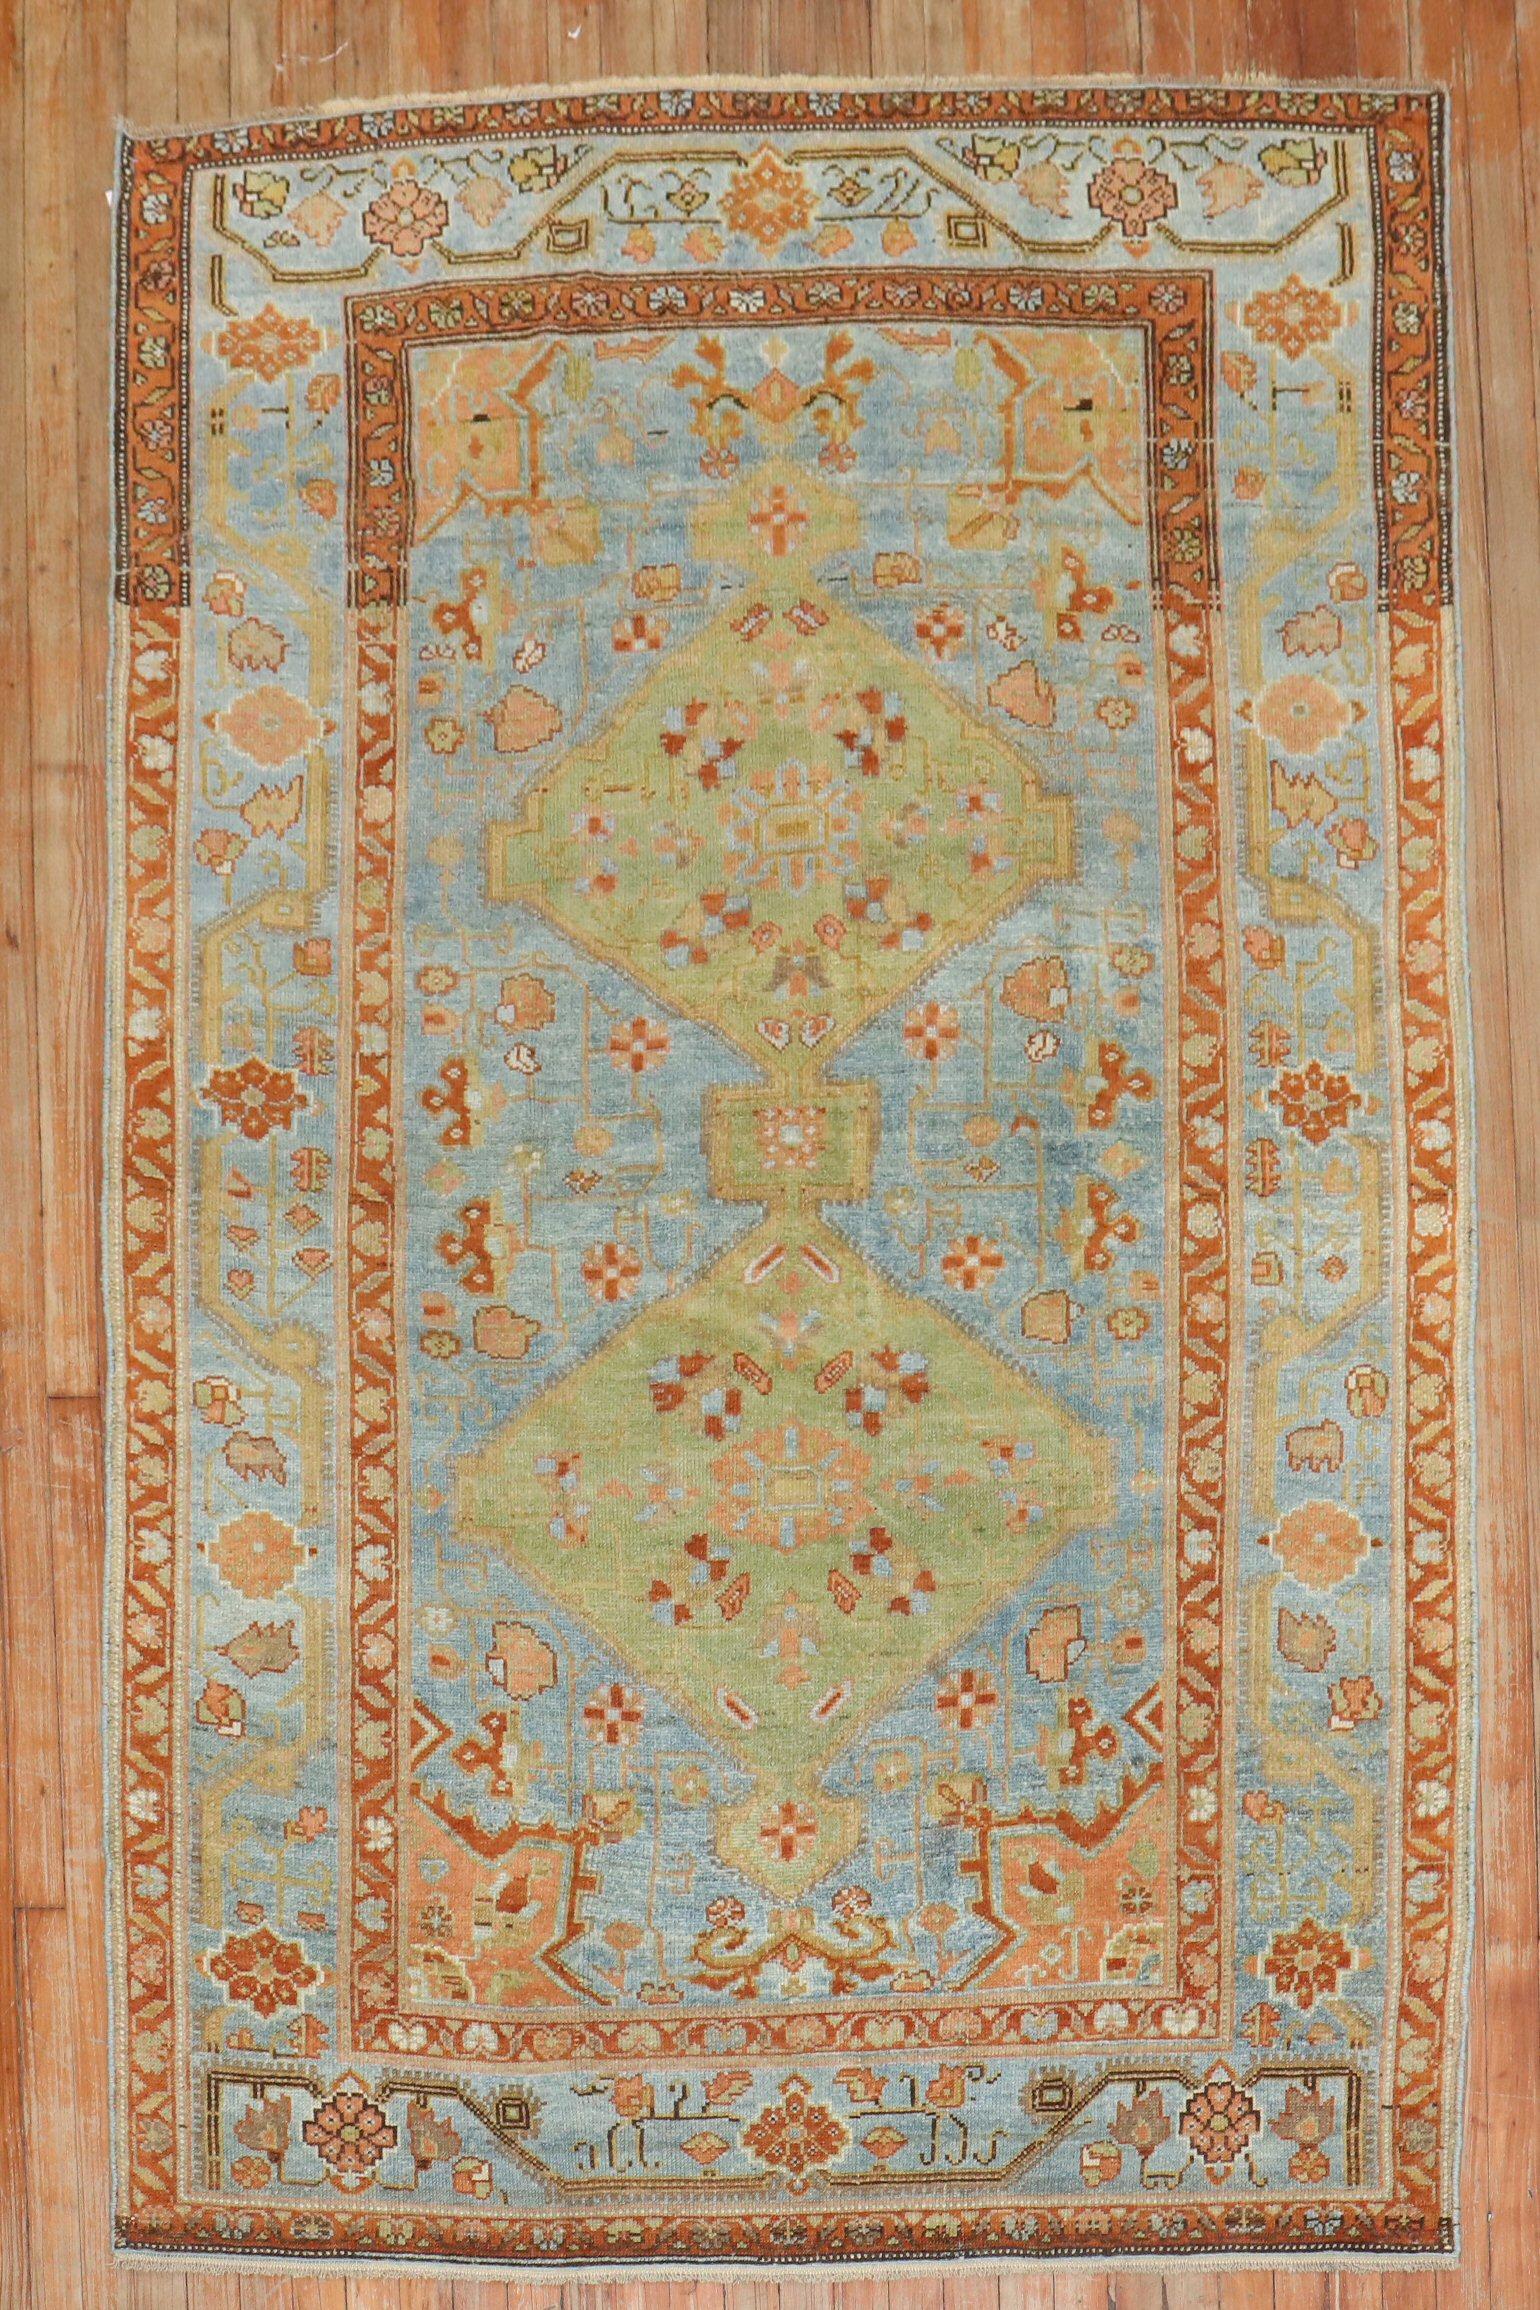 1920s Northwest Persian Rug in vivid blues and greens

Details
rug no.	j3049
size	4' 9